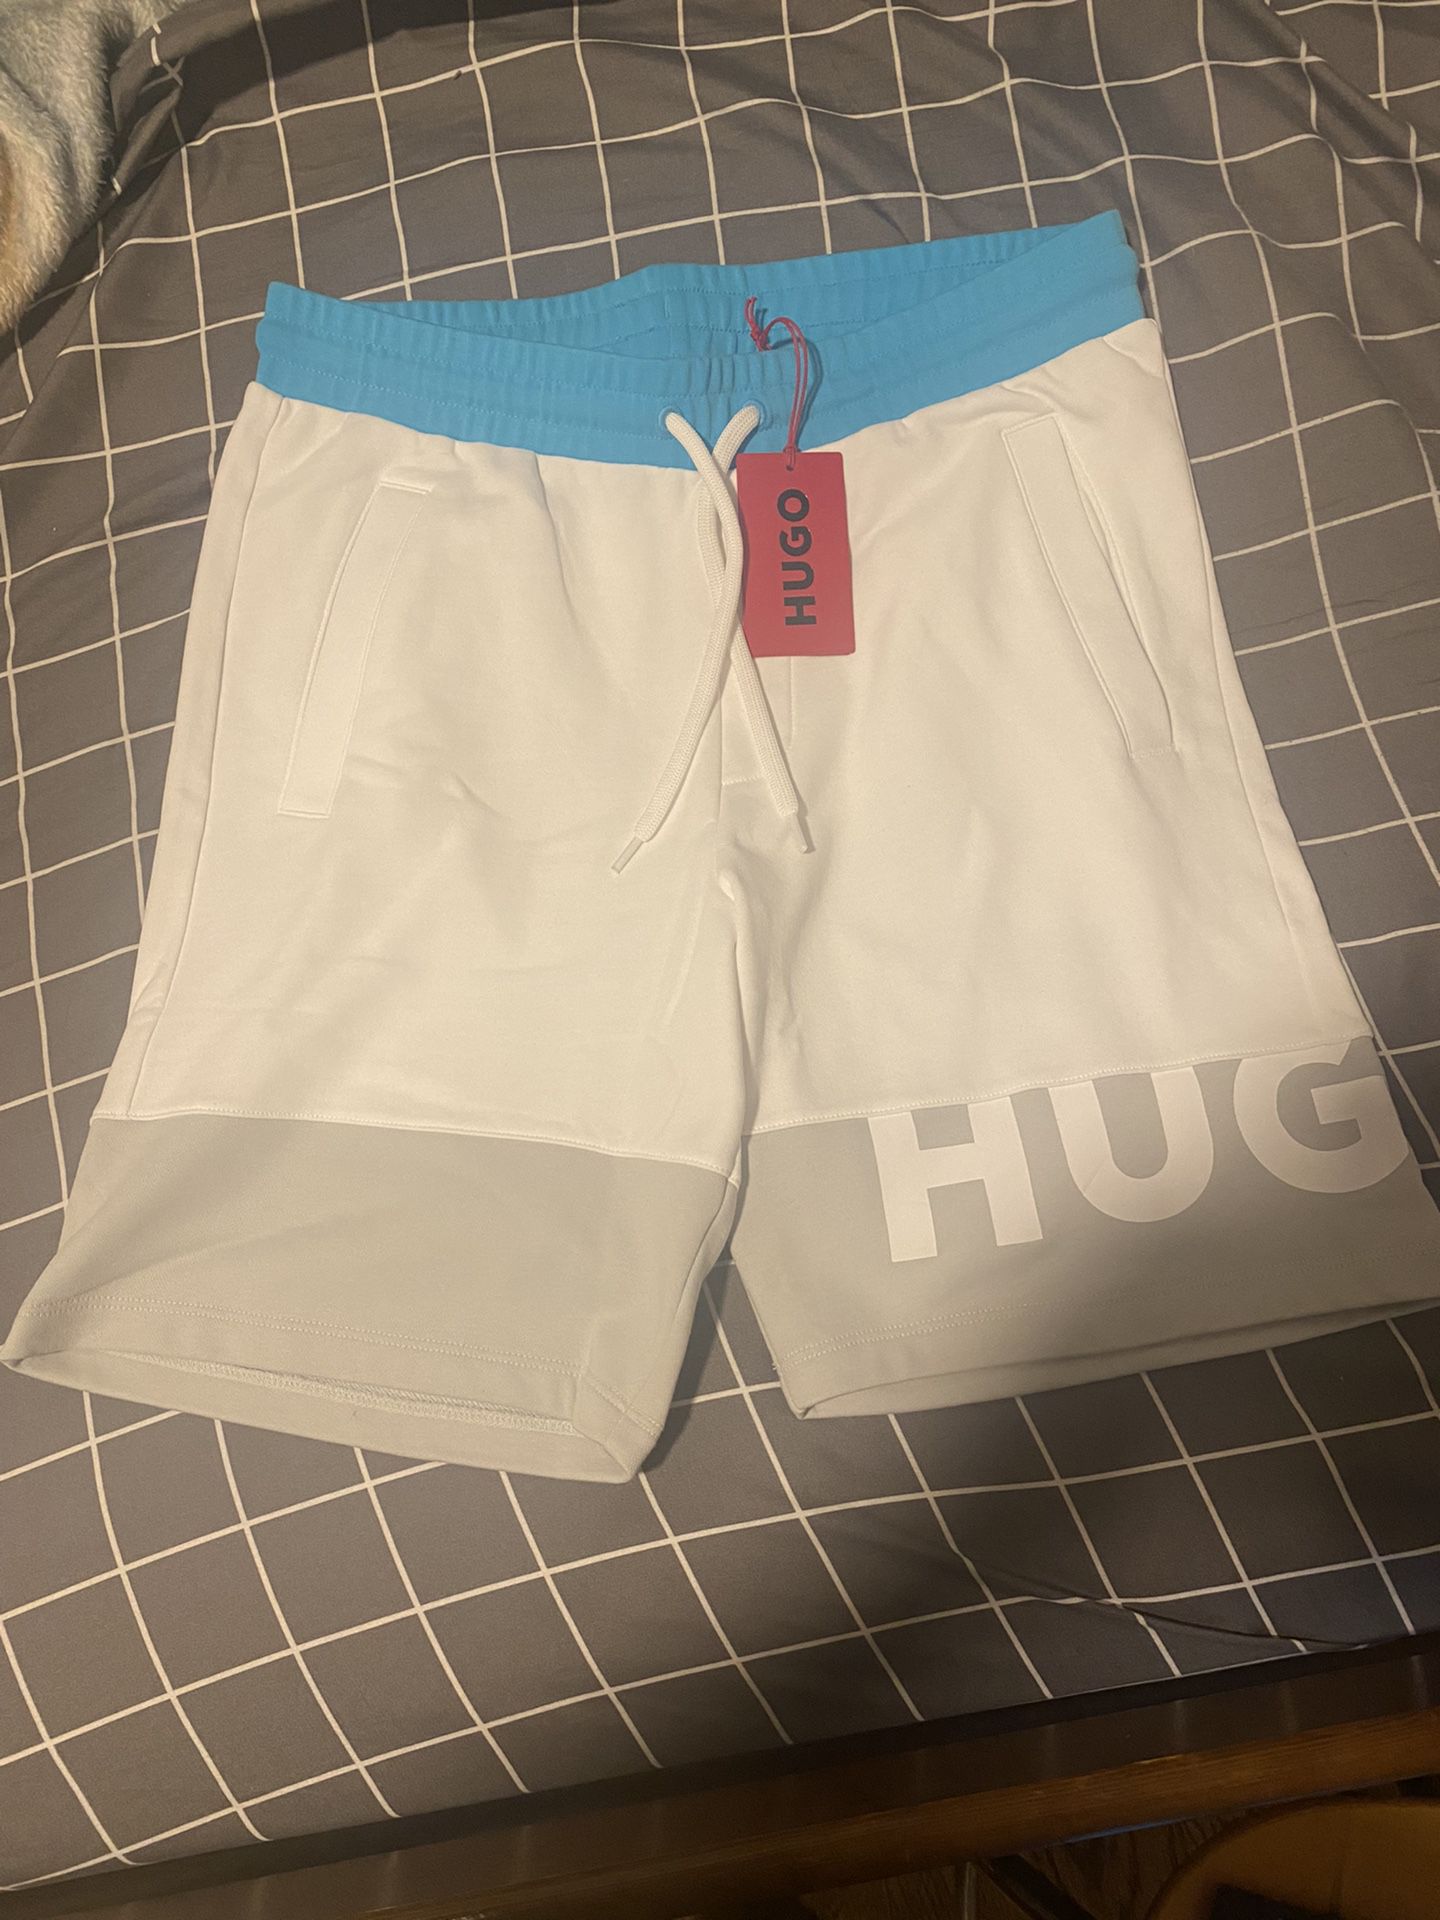 Almindelig rent Ansvarlige person Hugo boss shorts for Sale in New York, NY - OfferUp